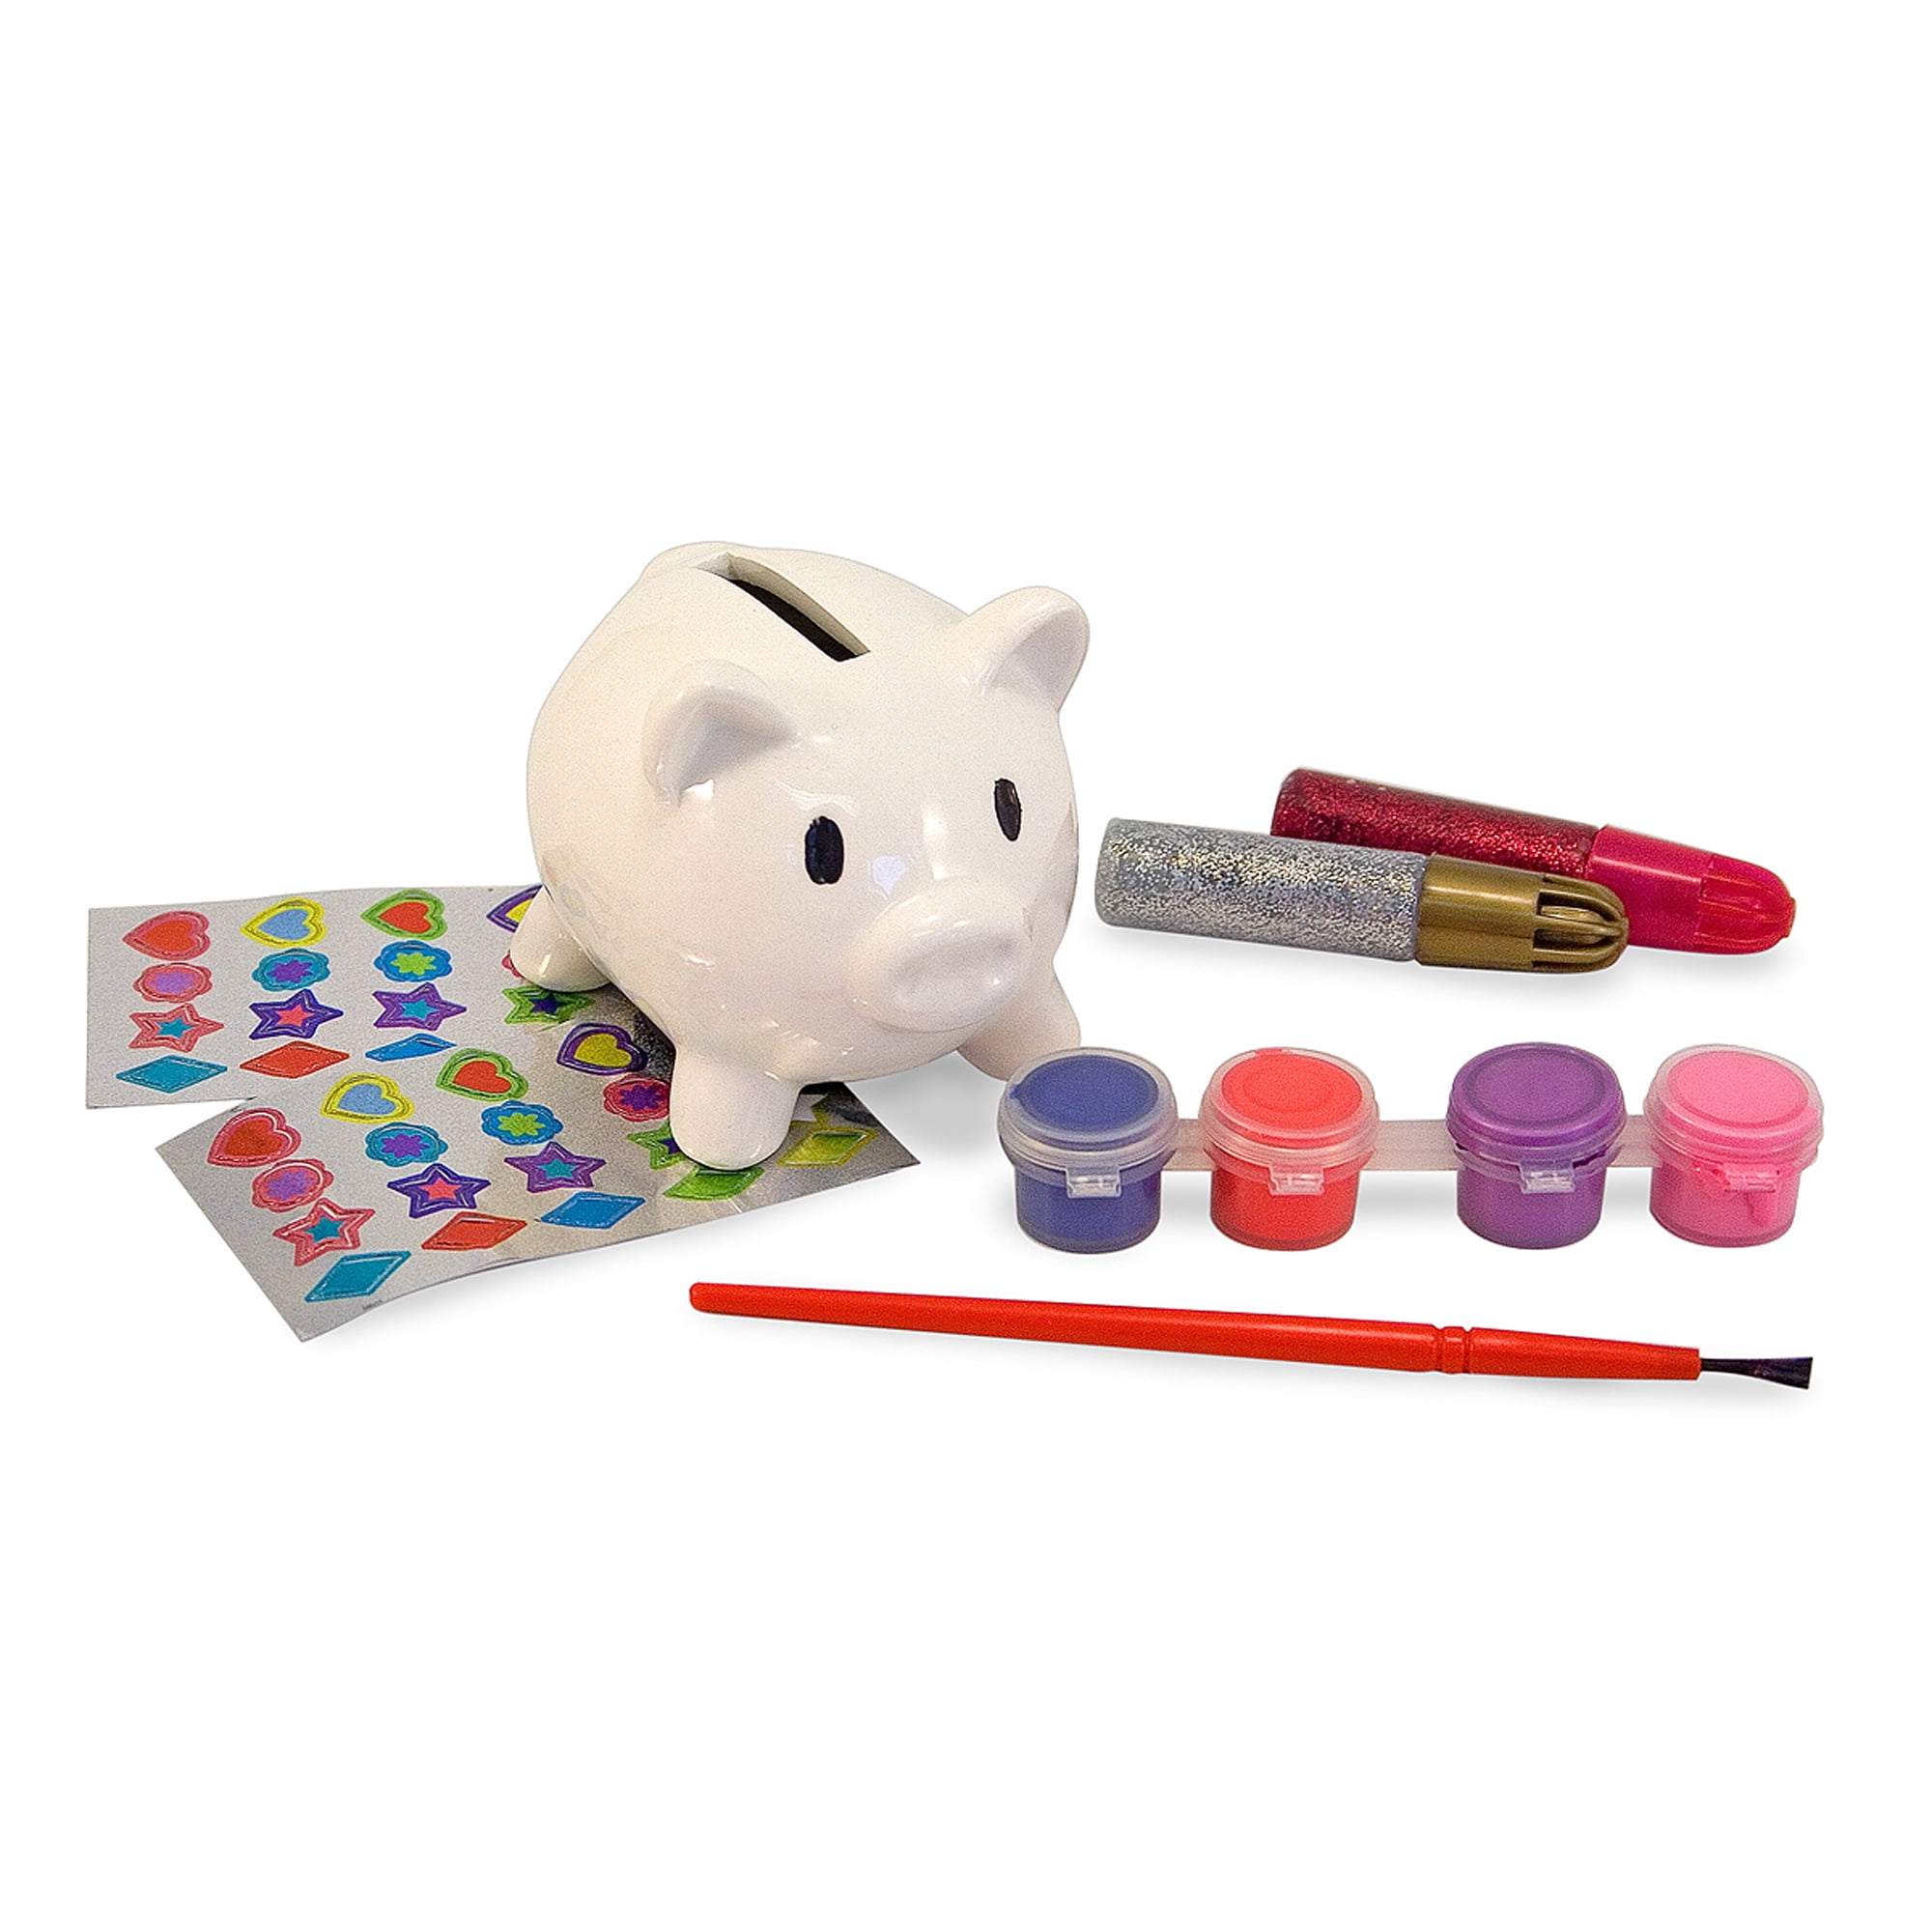 Create & Learn Coin Bank Kids Project Kit Accepts US Coins Ages 6 for sale online 